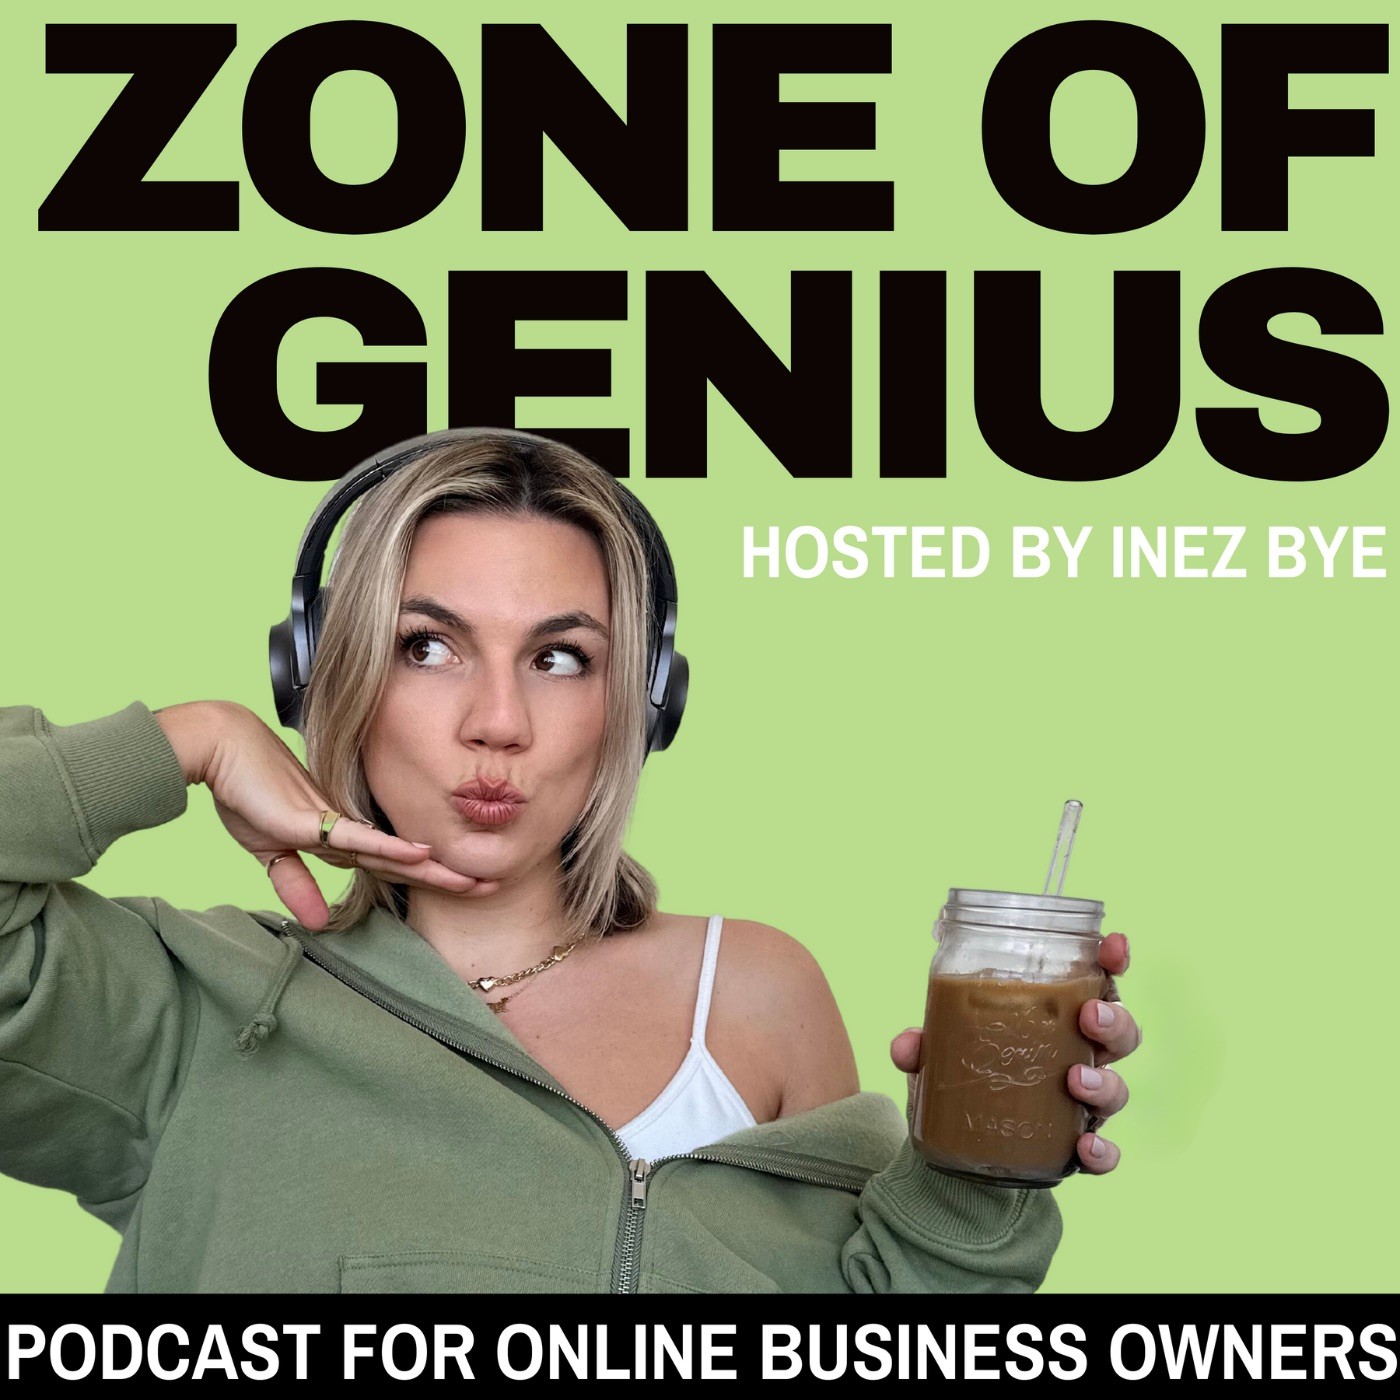 The Zone of Genius podcast for business owners